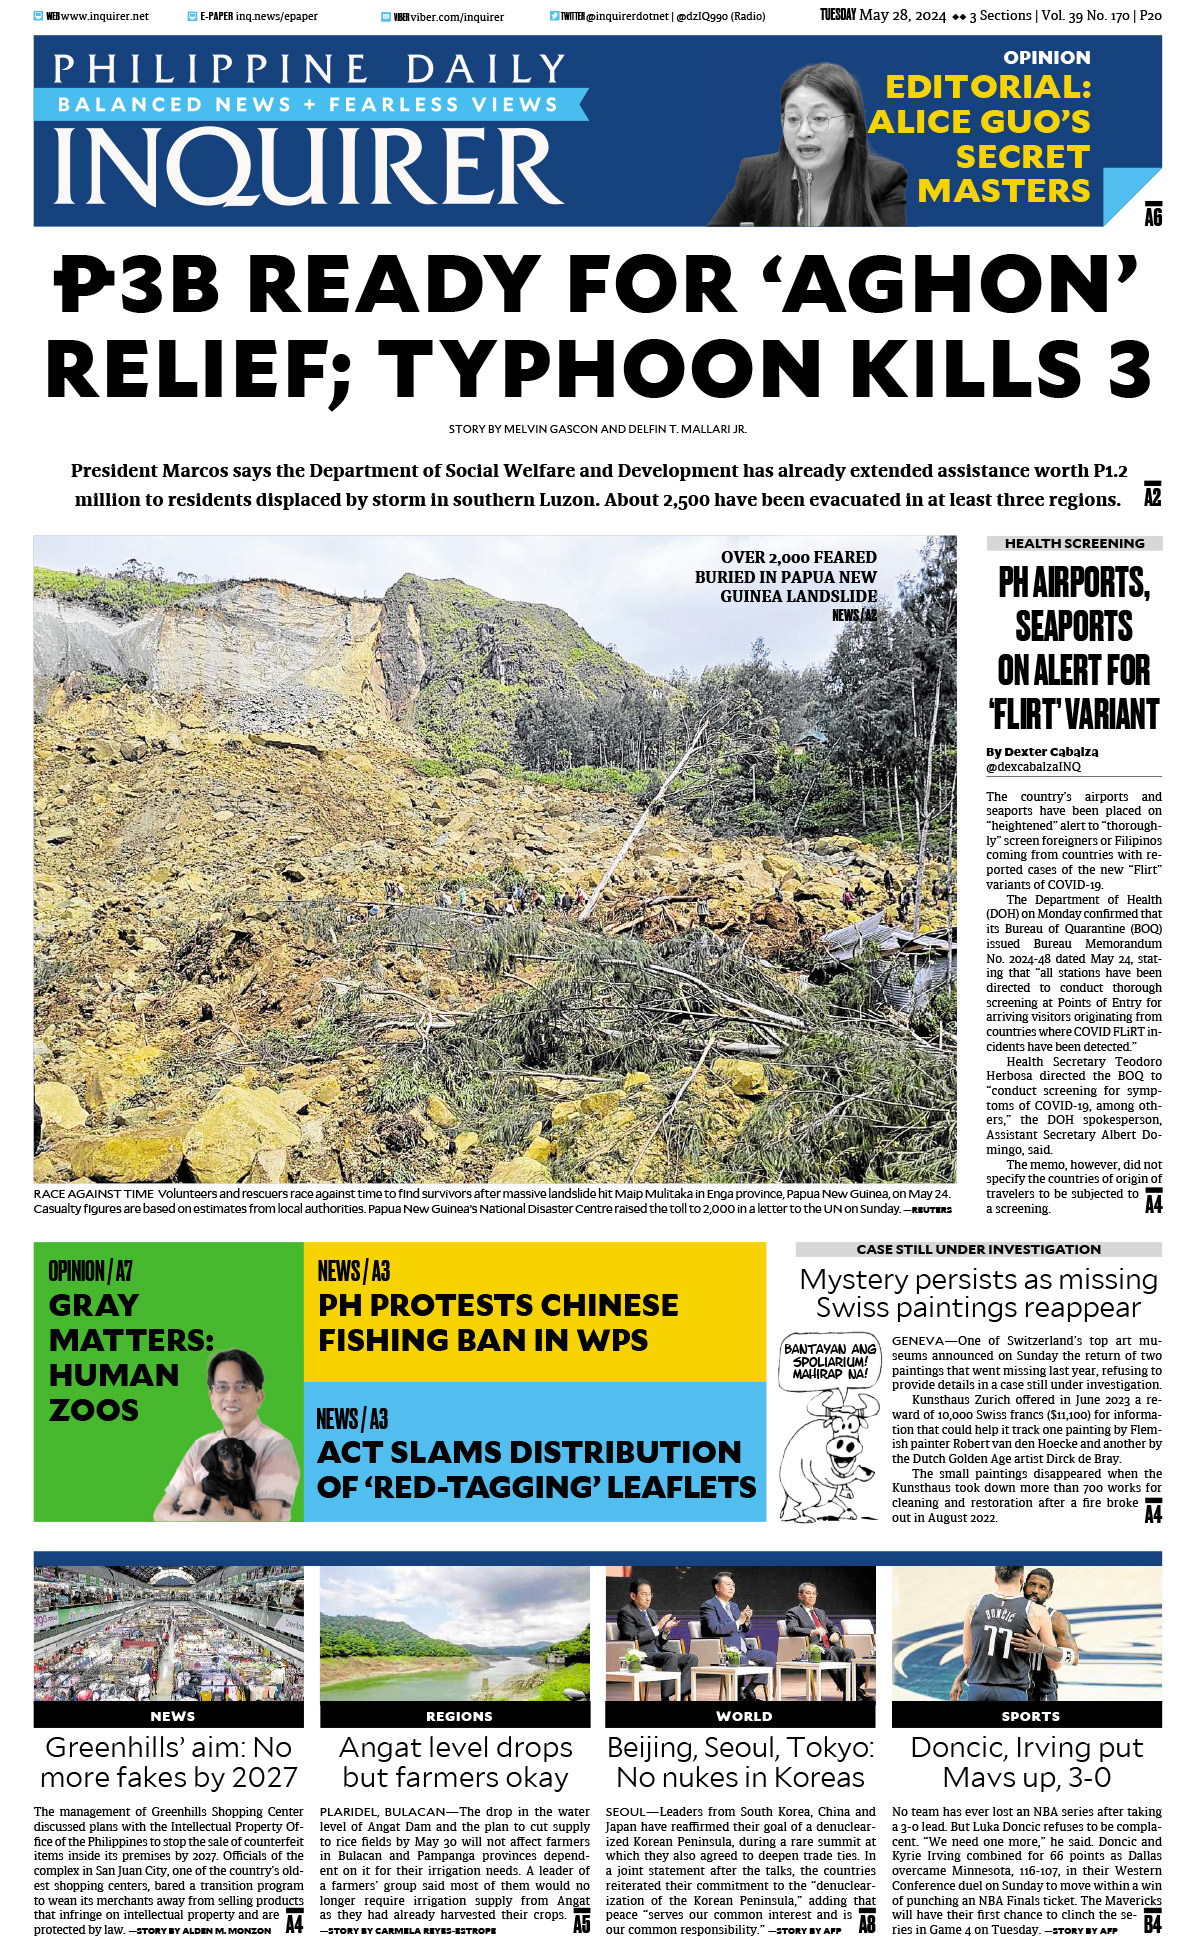 Today’s Paper: May 28, 2024